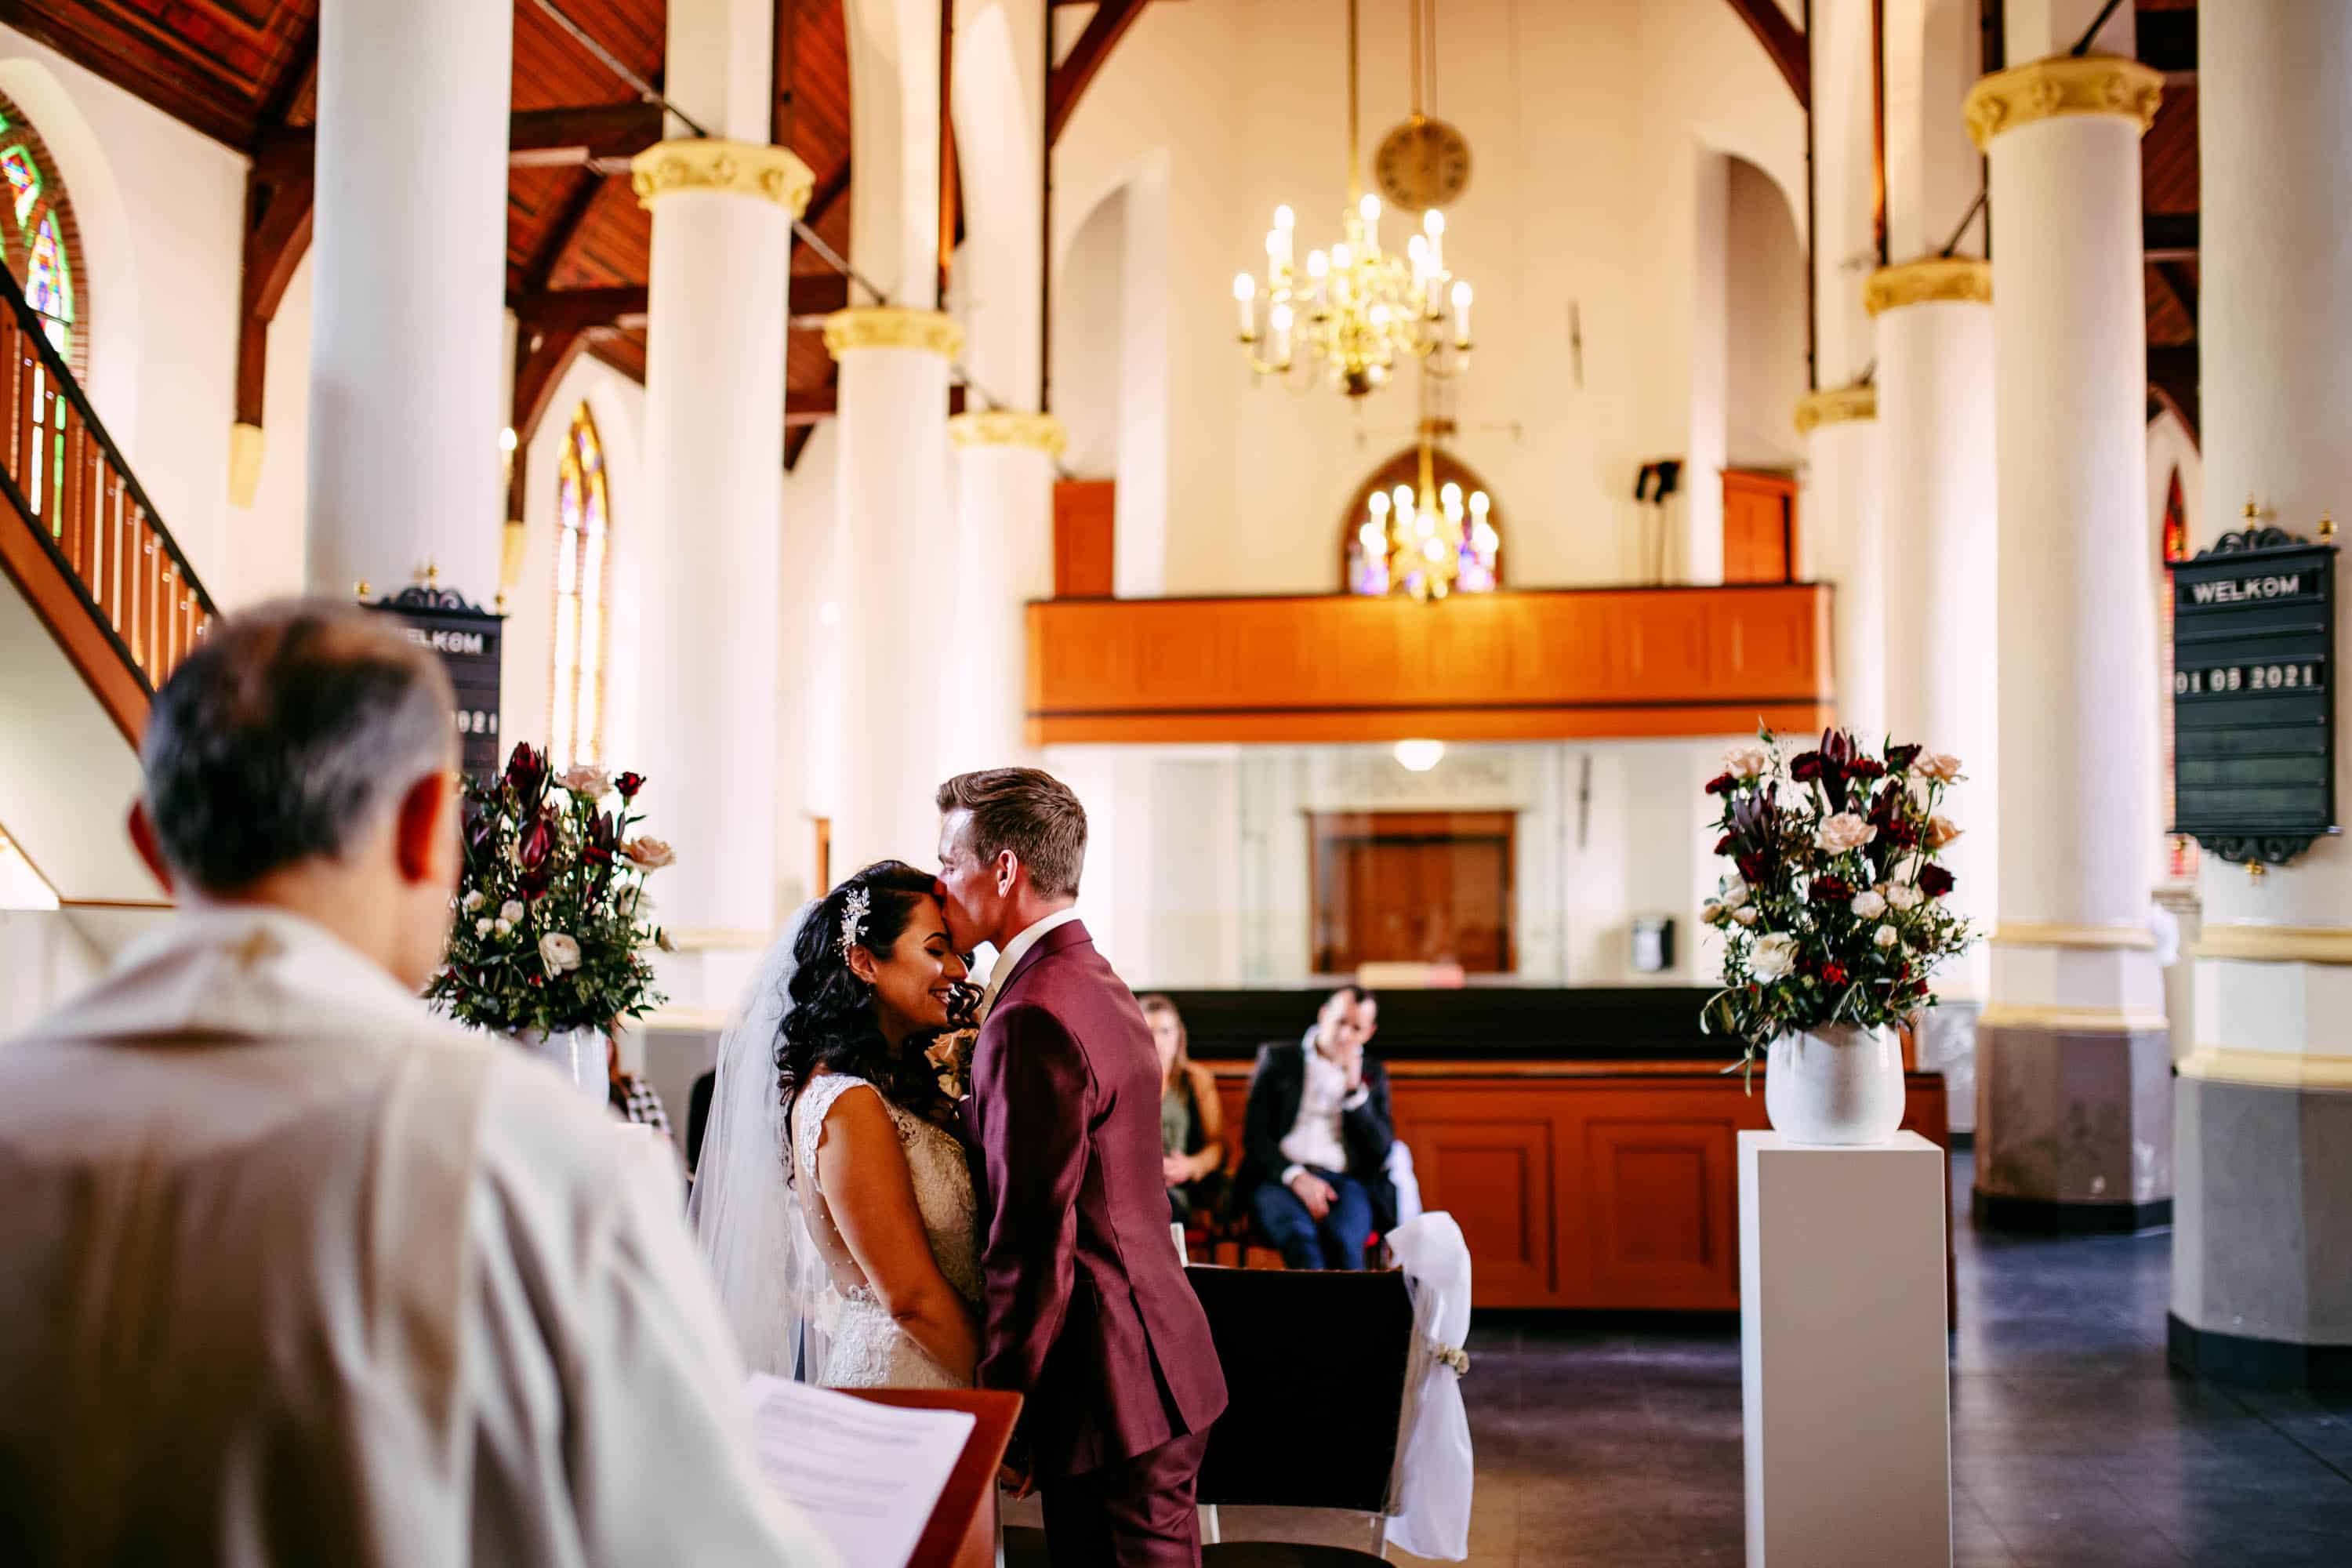 A bride and groom kiss in a church.